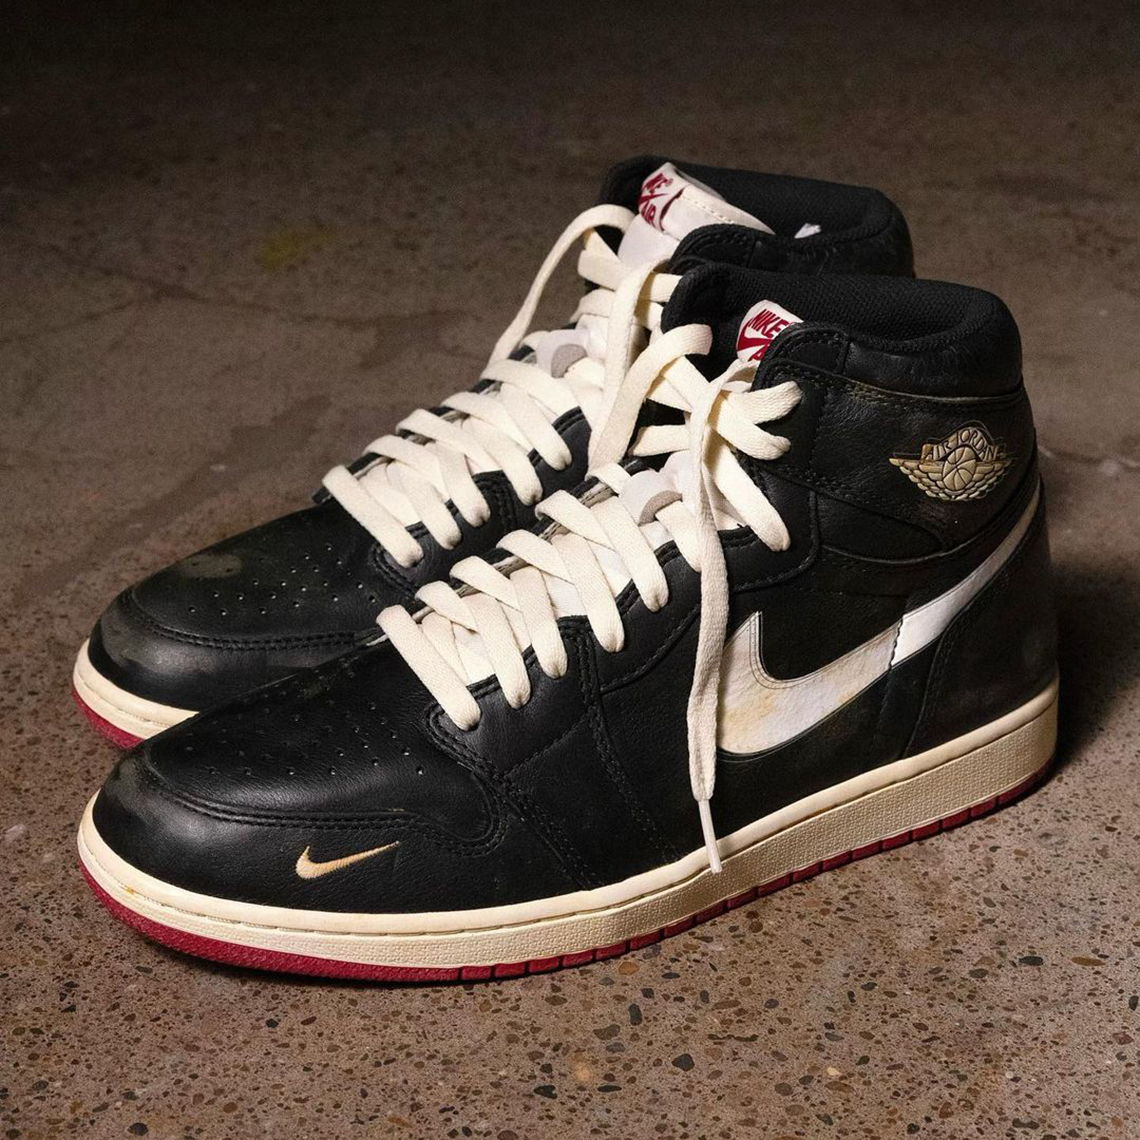 Nike SB x Air Jordan 1 Collab: Official Images Have Surfaced Online